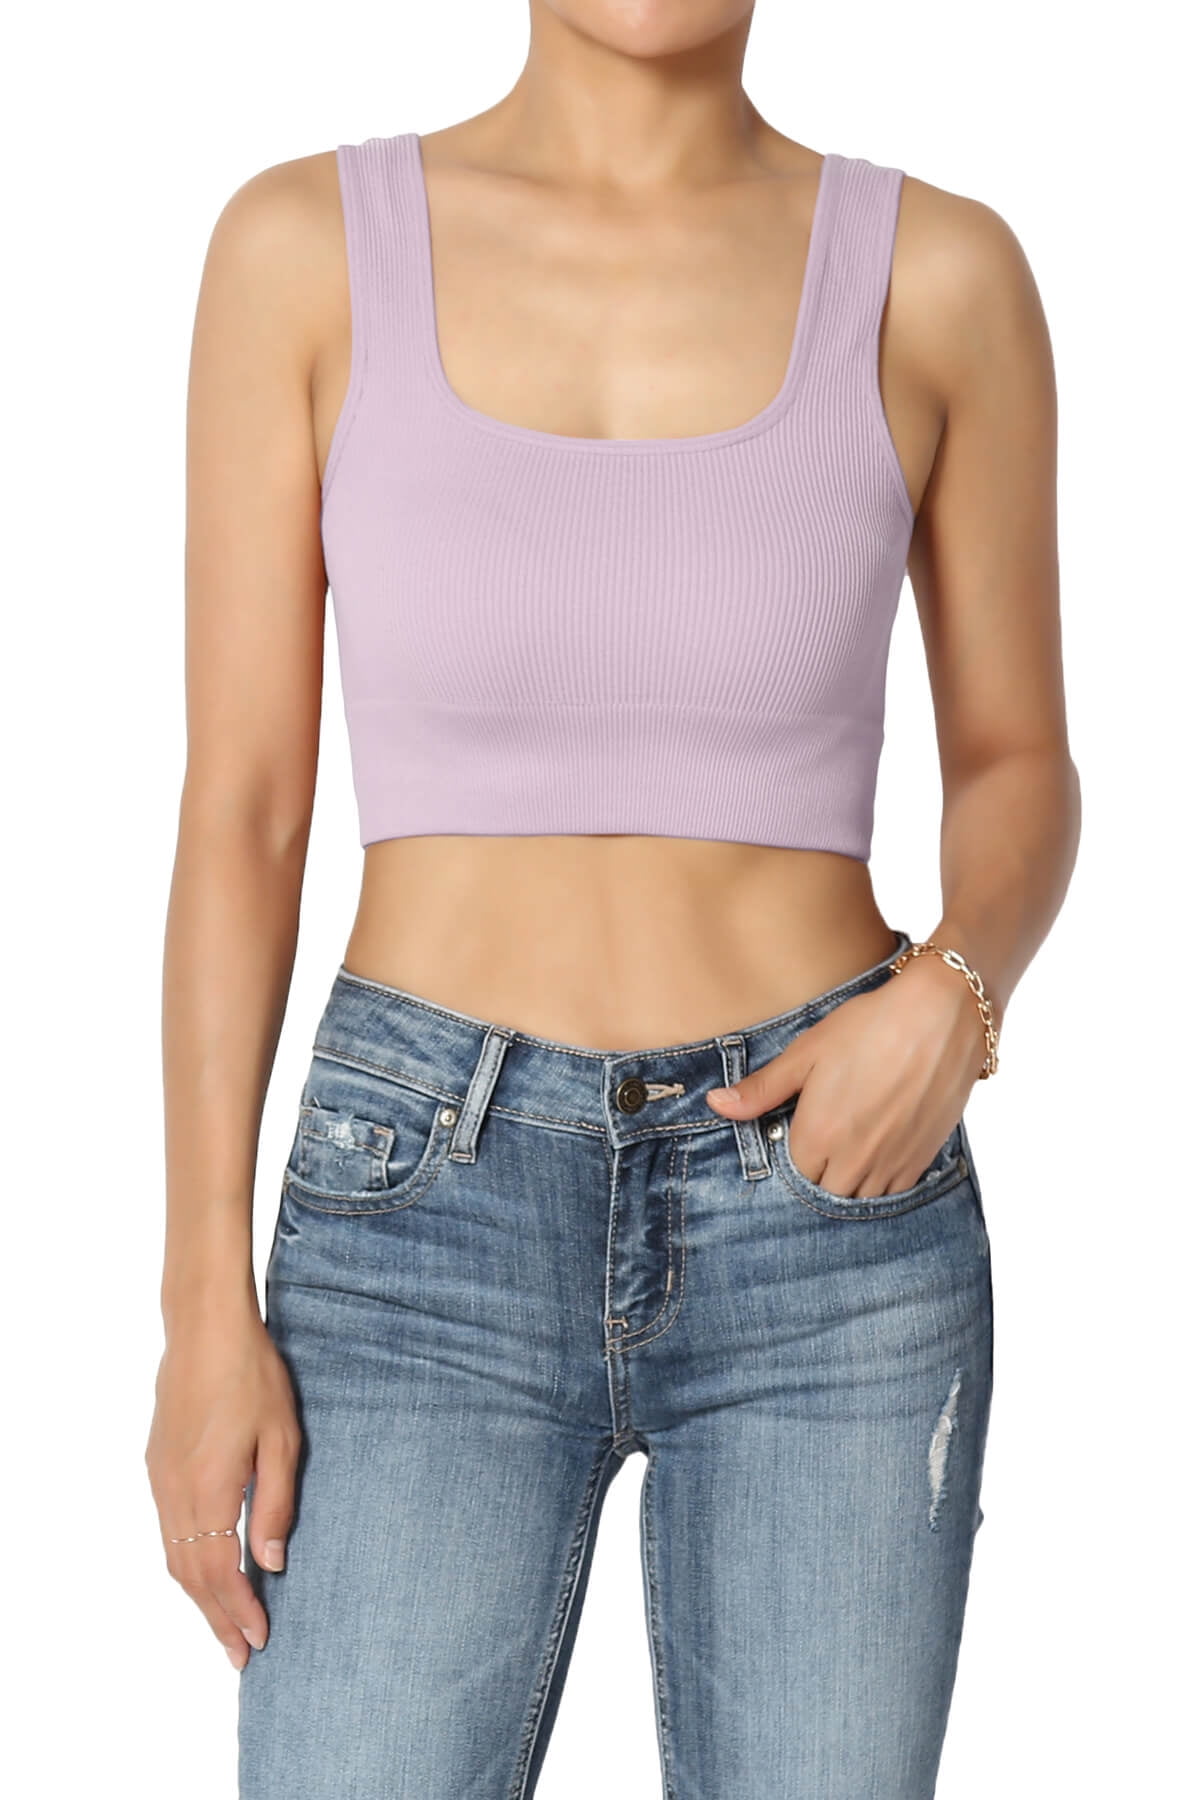 TheMogan S~XL Square Neck Stretchy Ribbed Seamless Cropped Tank